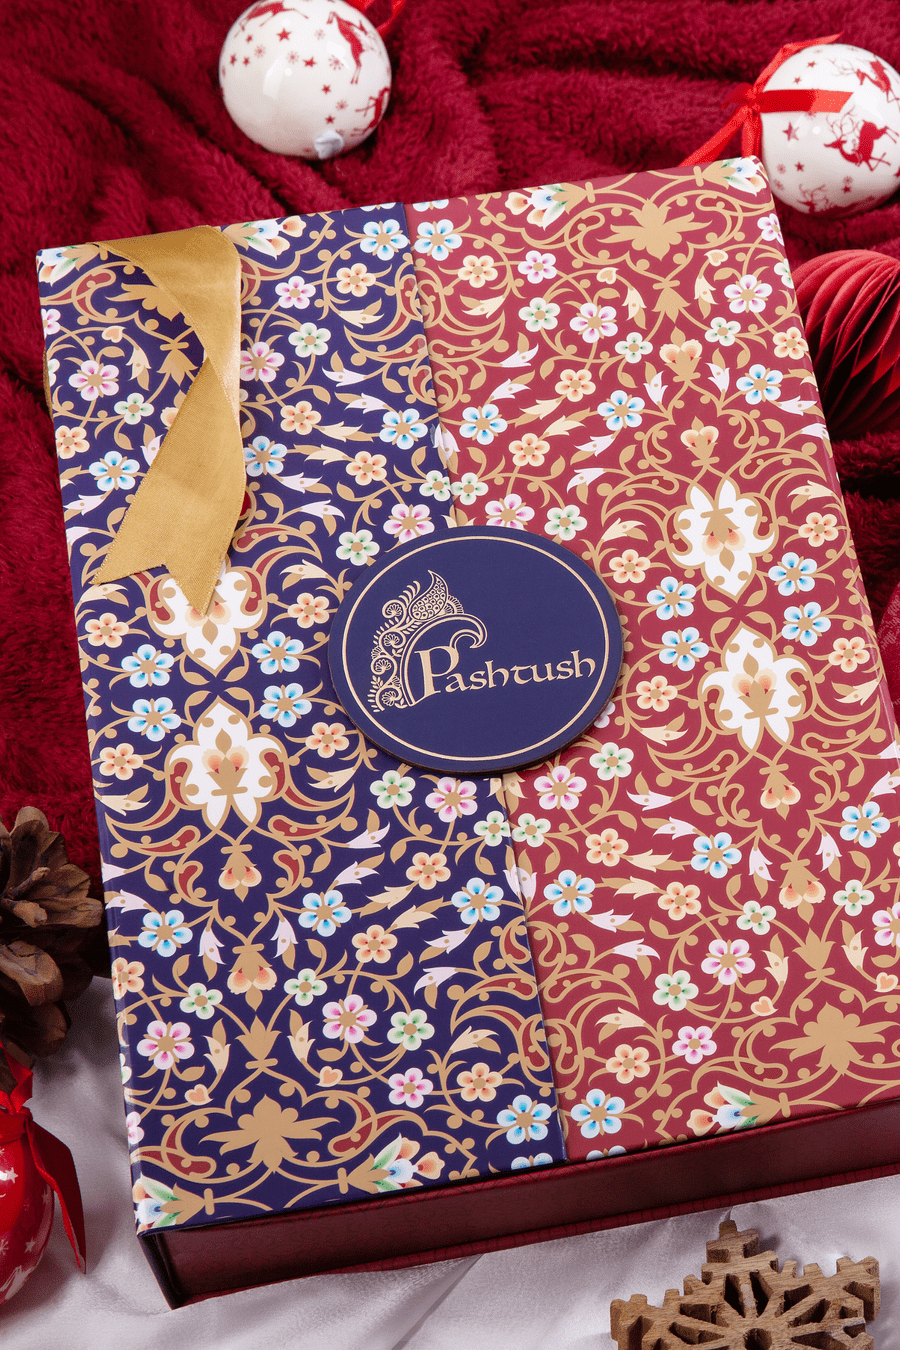 Pashtush India Gift Pack Pashtush His And Her Gift Set Of Reversible Paisley Design Stoles With Premium Gift Box Packaging, Navy Blue and Powder Pink